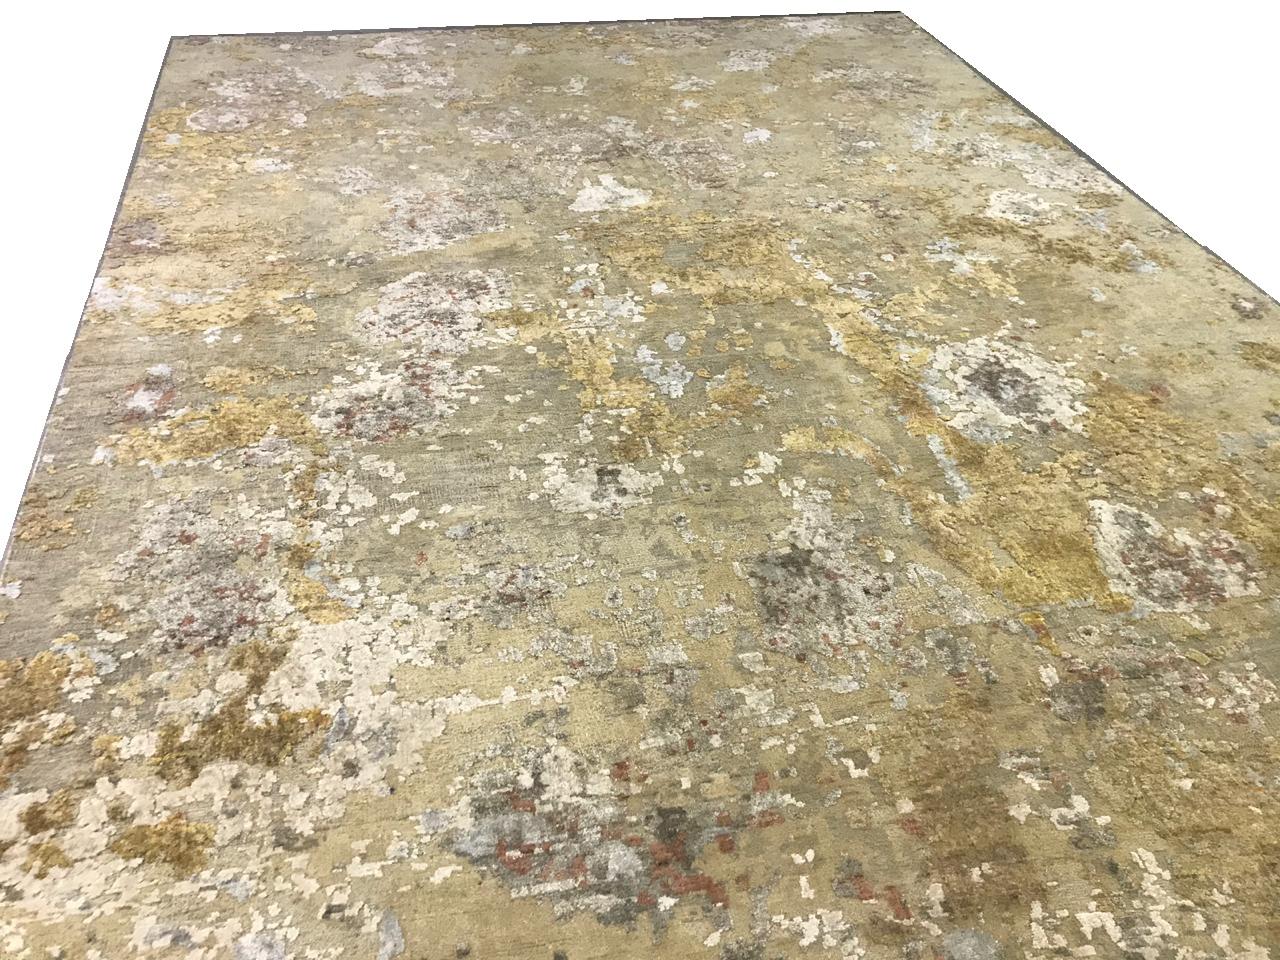 The Odyssey Collection a breakthrough, three dimensional and multi textural rug collection, inspired by NASA imagery. Distressed wool and natural silk are hand knotted to create three levels of visual and tactile finery. The collection pairs vintage